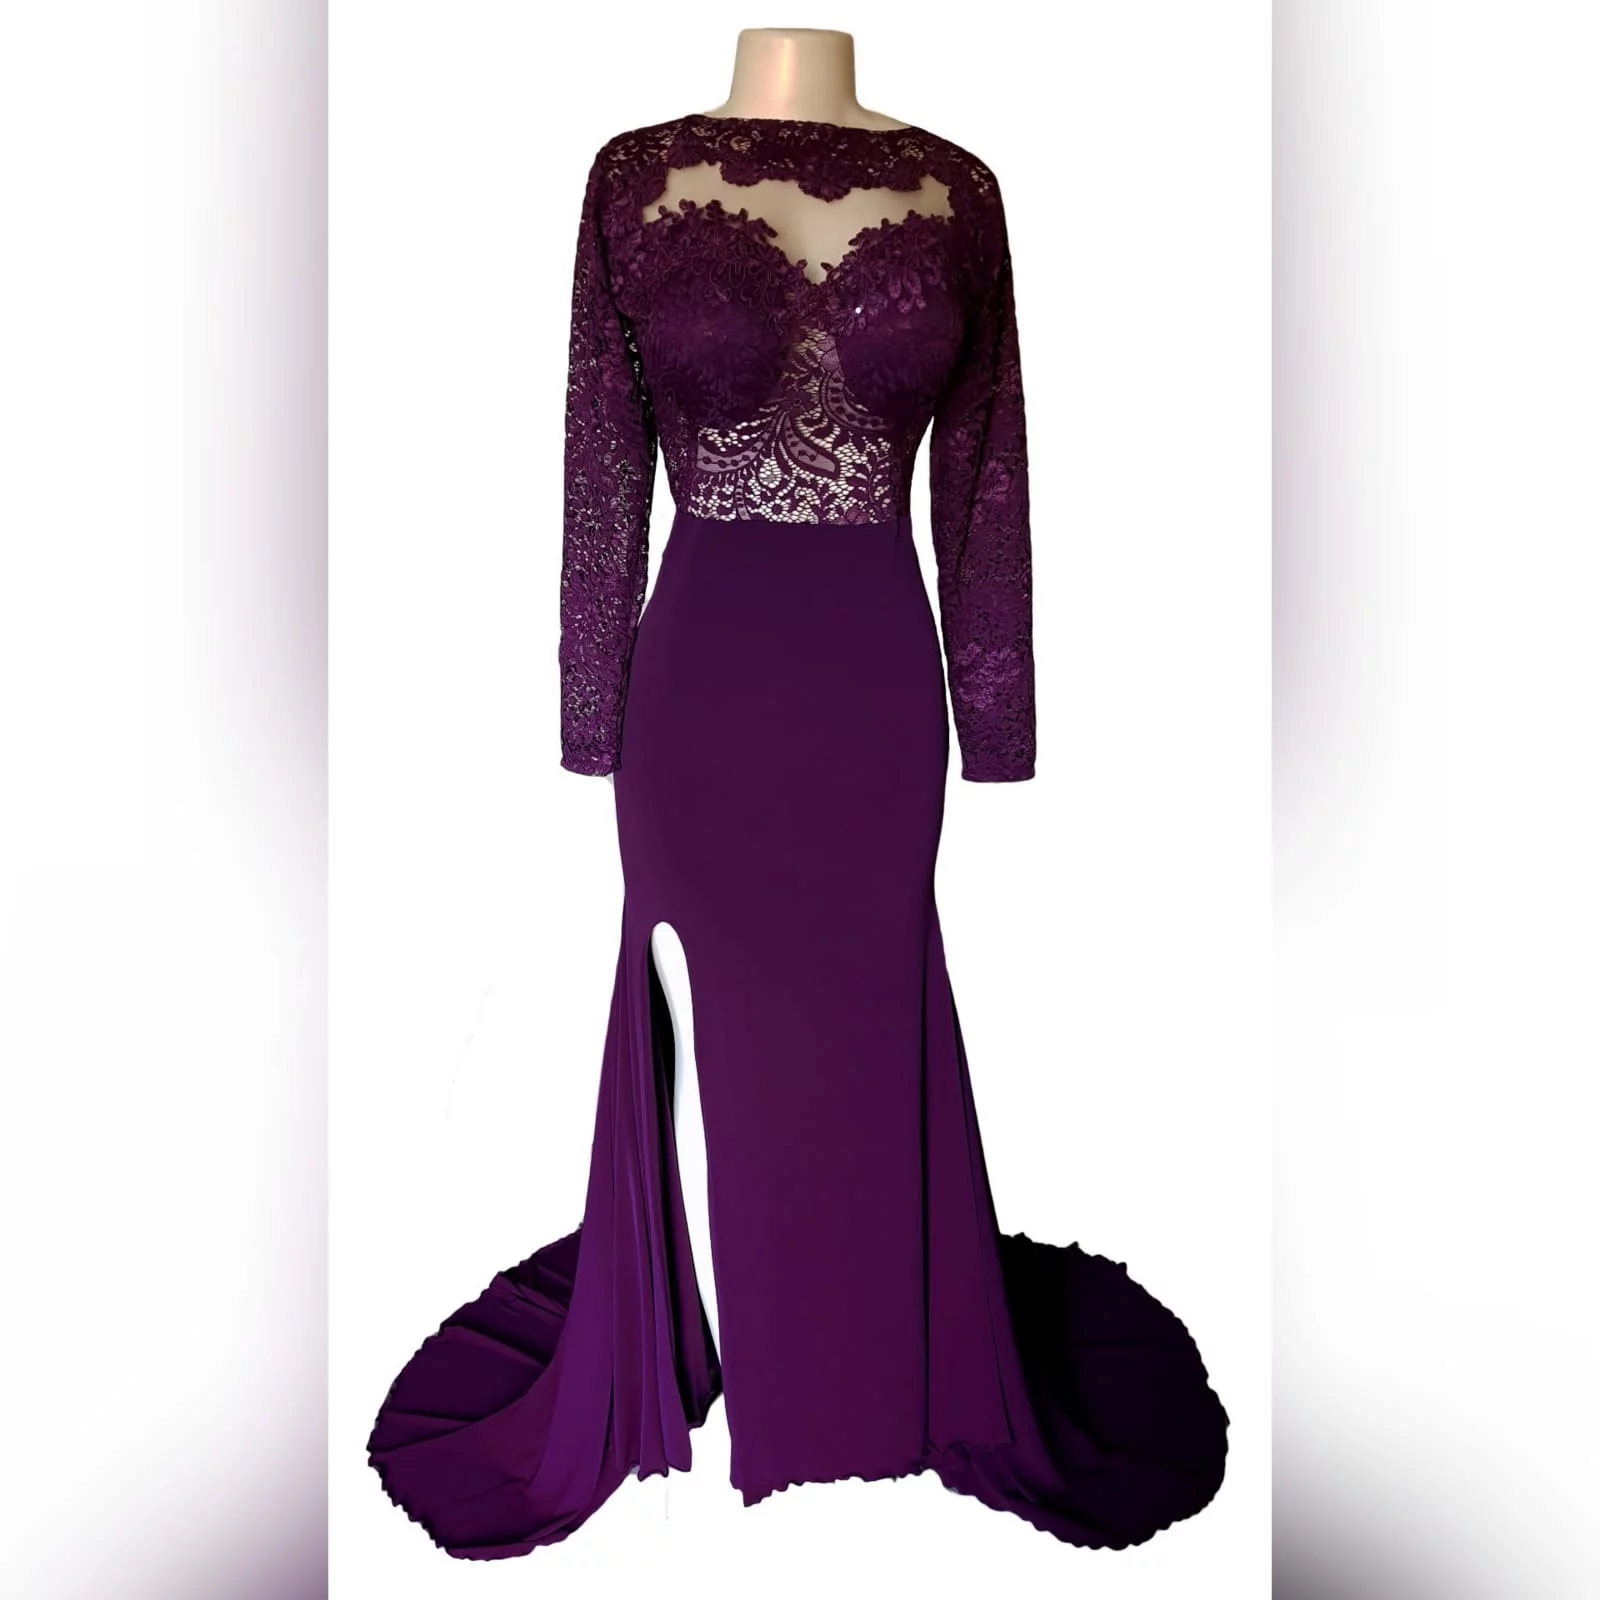 Plum lace bodice soft mermaid prom dress 3 plum lace bodice, soft mermaid prom dress with a low open rounded open back and hip lace design. With long lace sleeves and a long train.